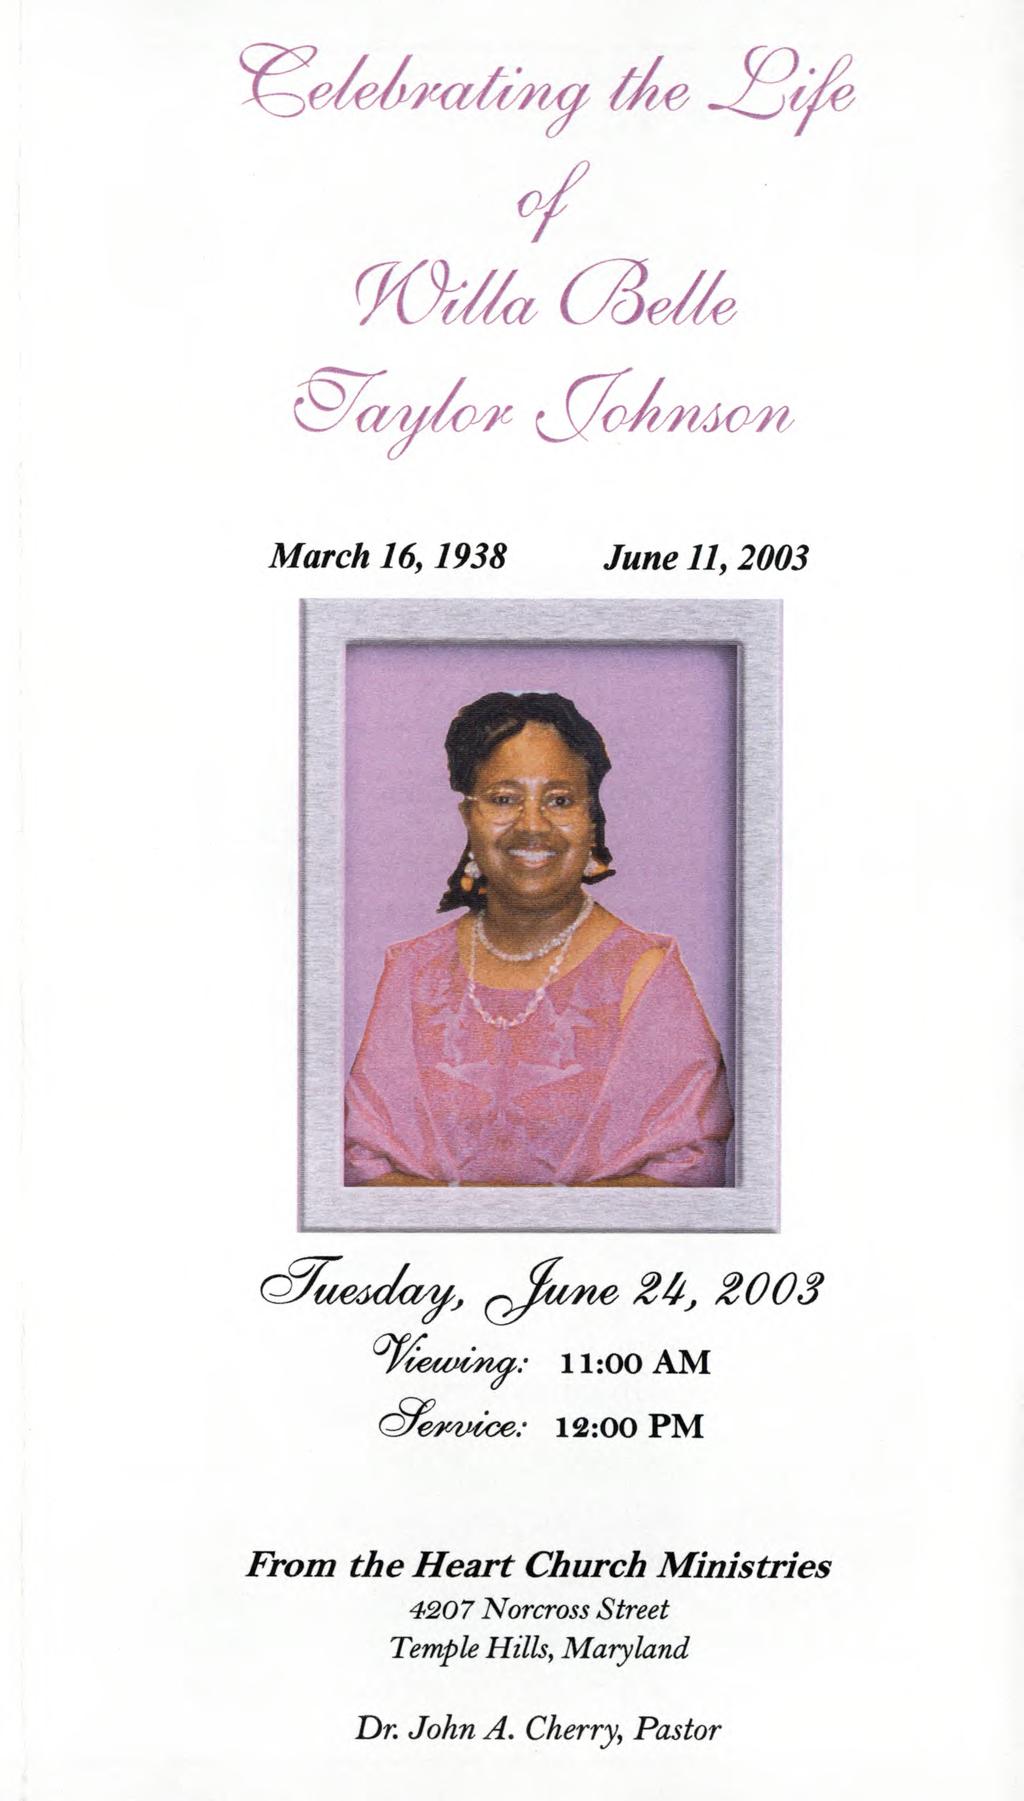 a w& March 16, 1938 June 11, 2003 24, 2003 11:00 AM 12:OO PM From the Heart Church